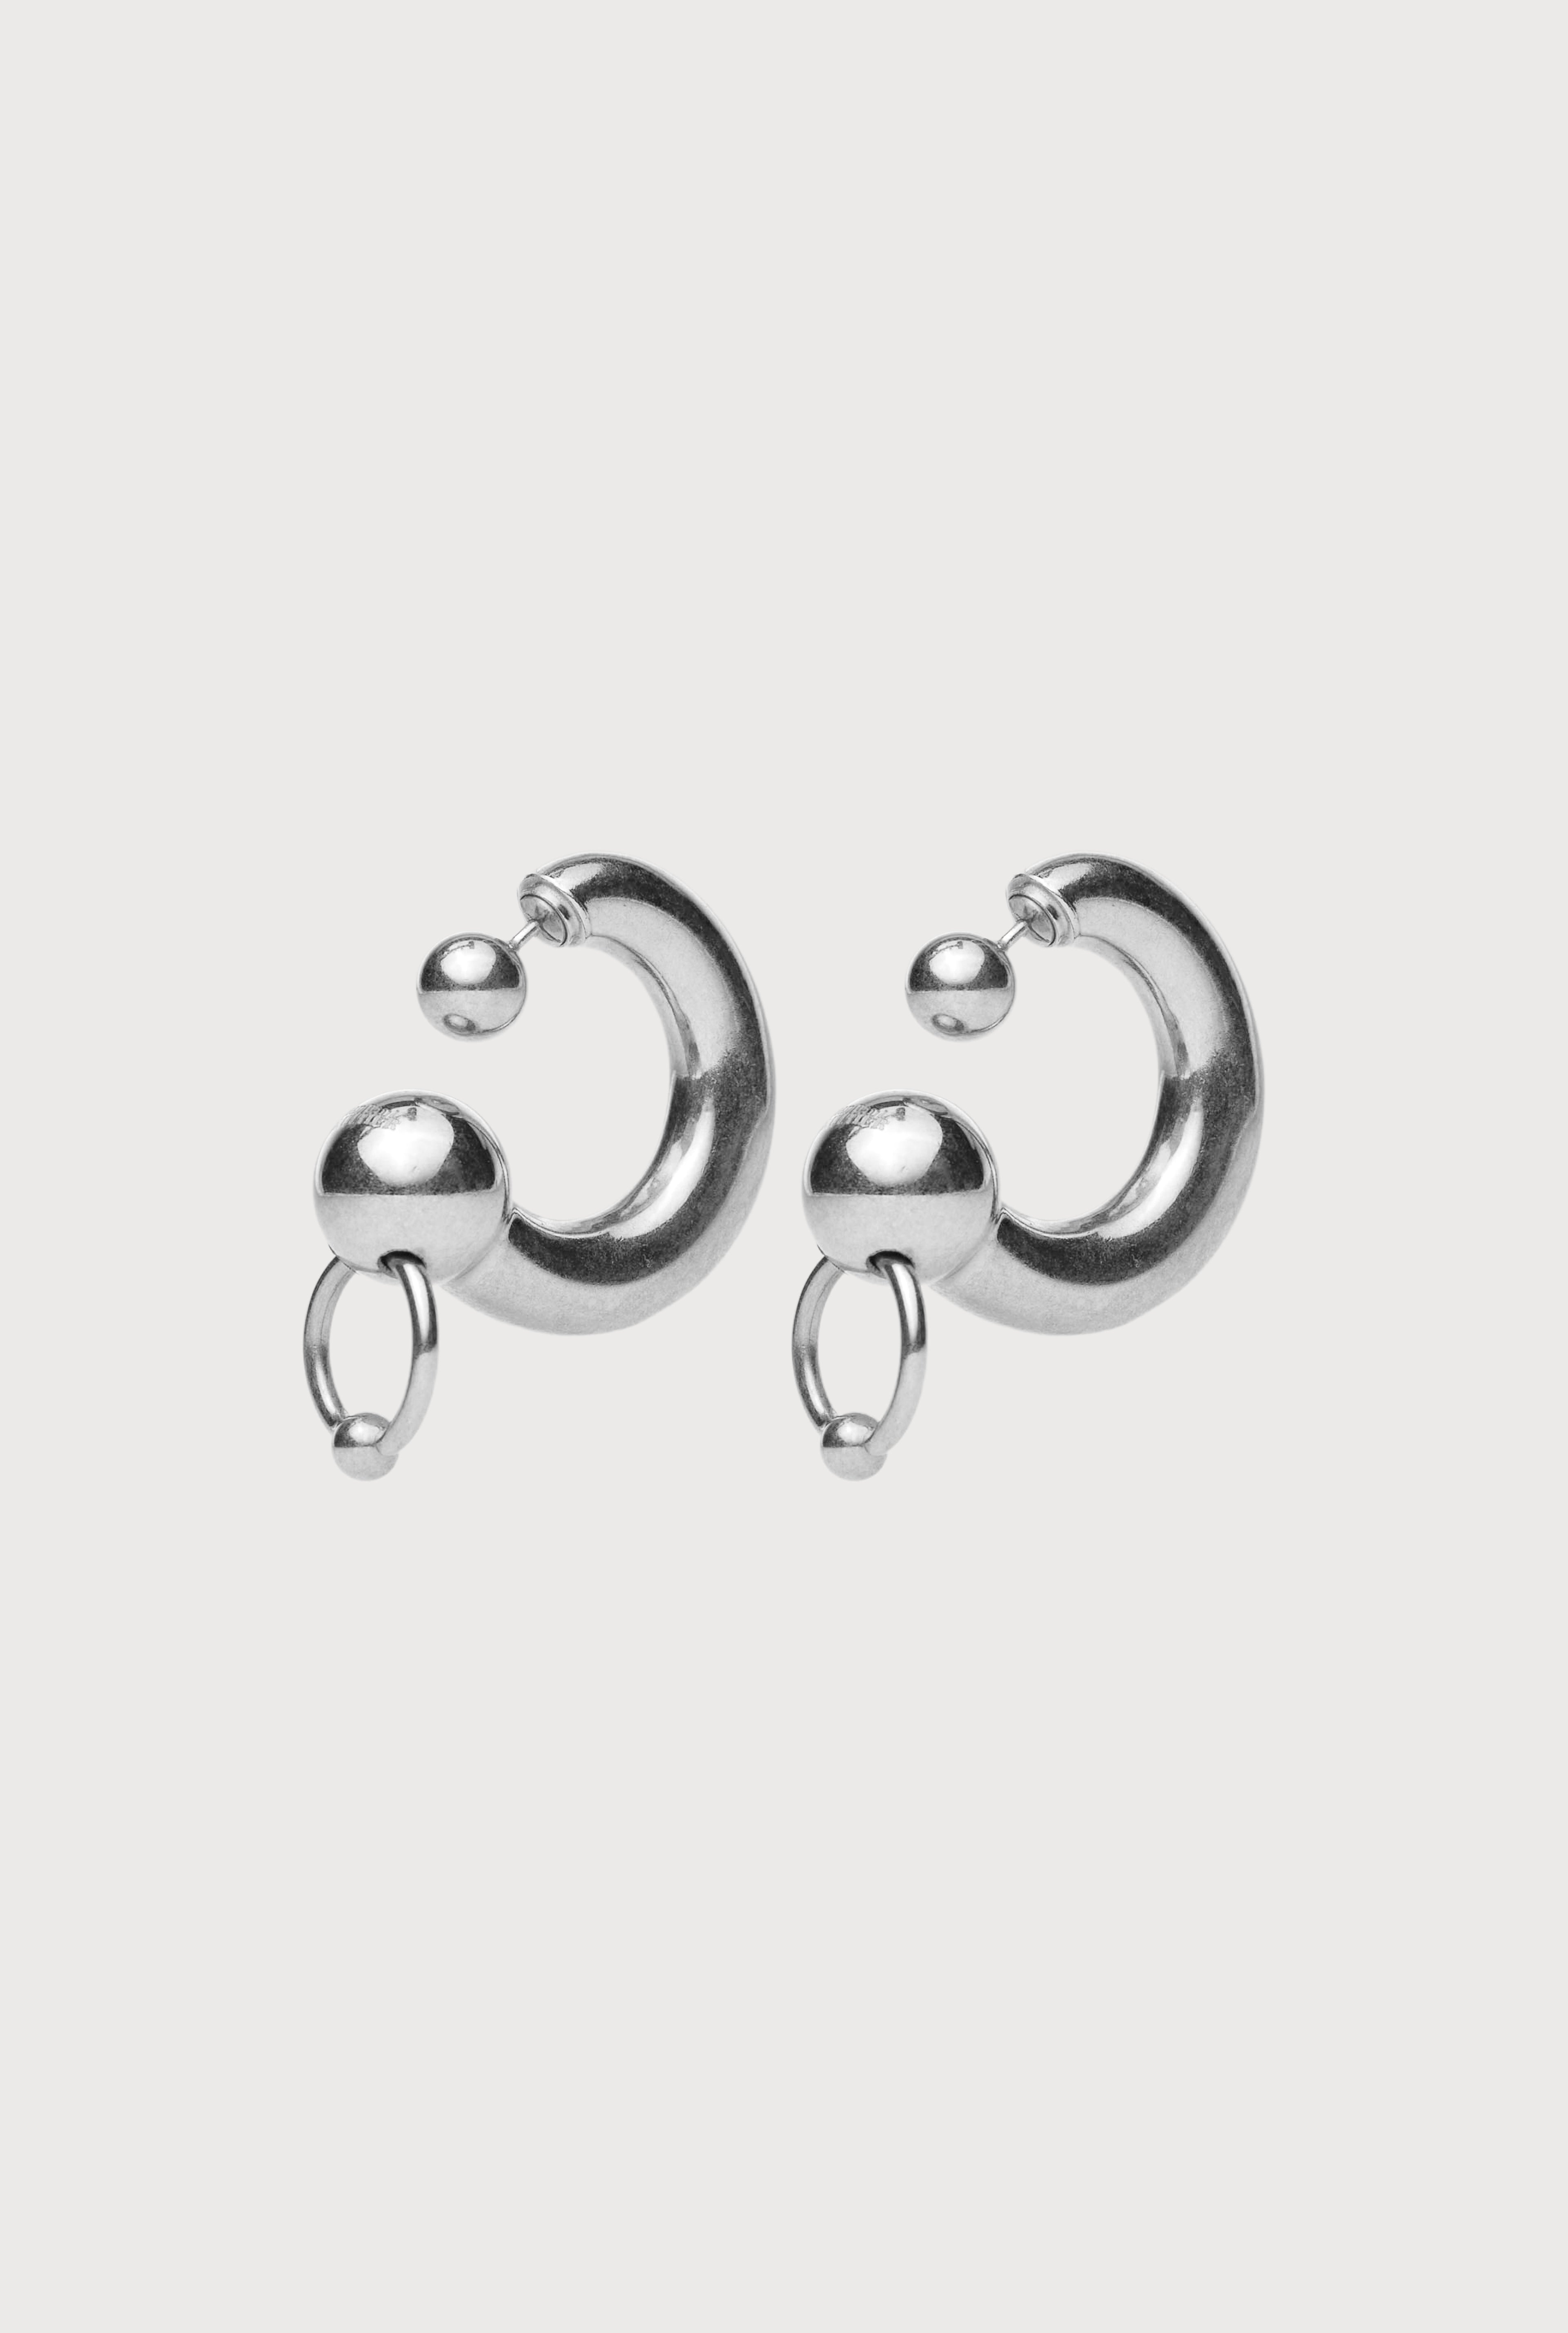 The Silver-Tone Ring Earrings 